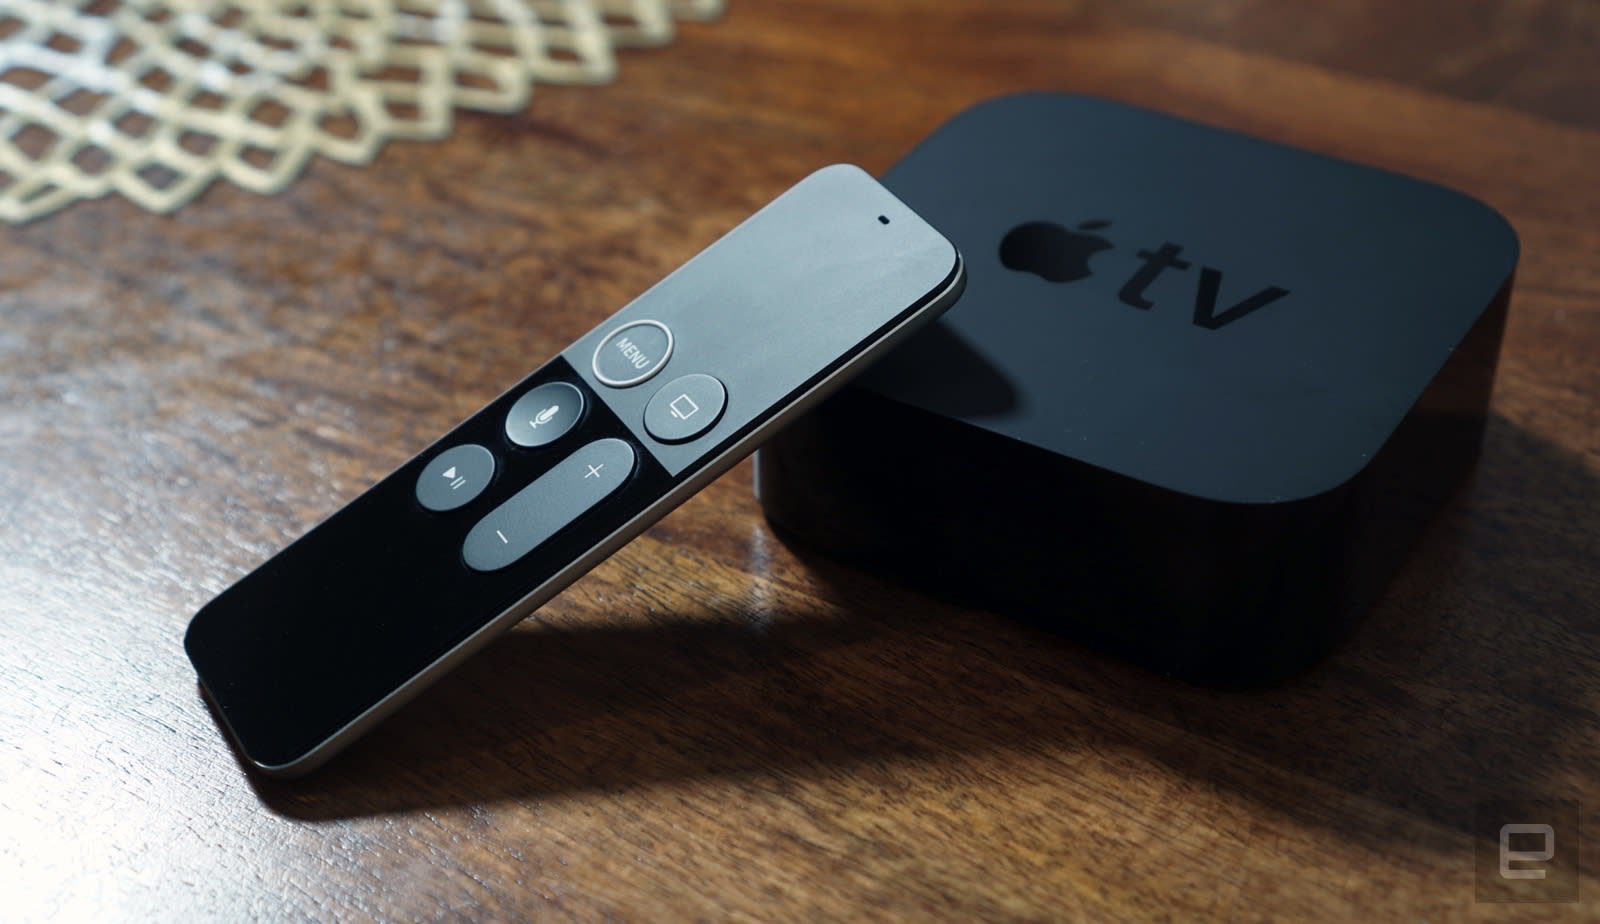 Apple TV 4K review: Almost perfect